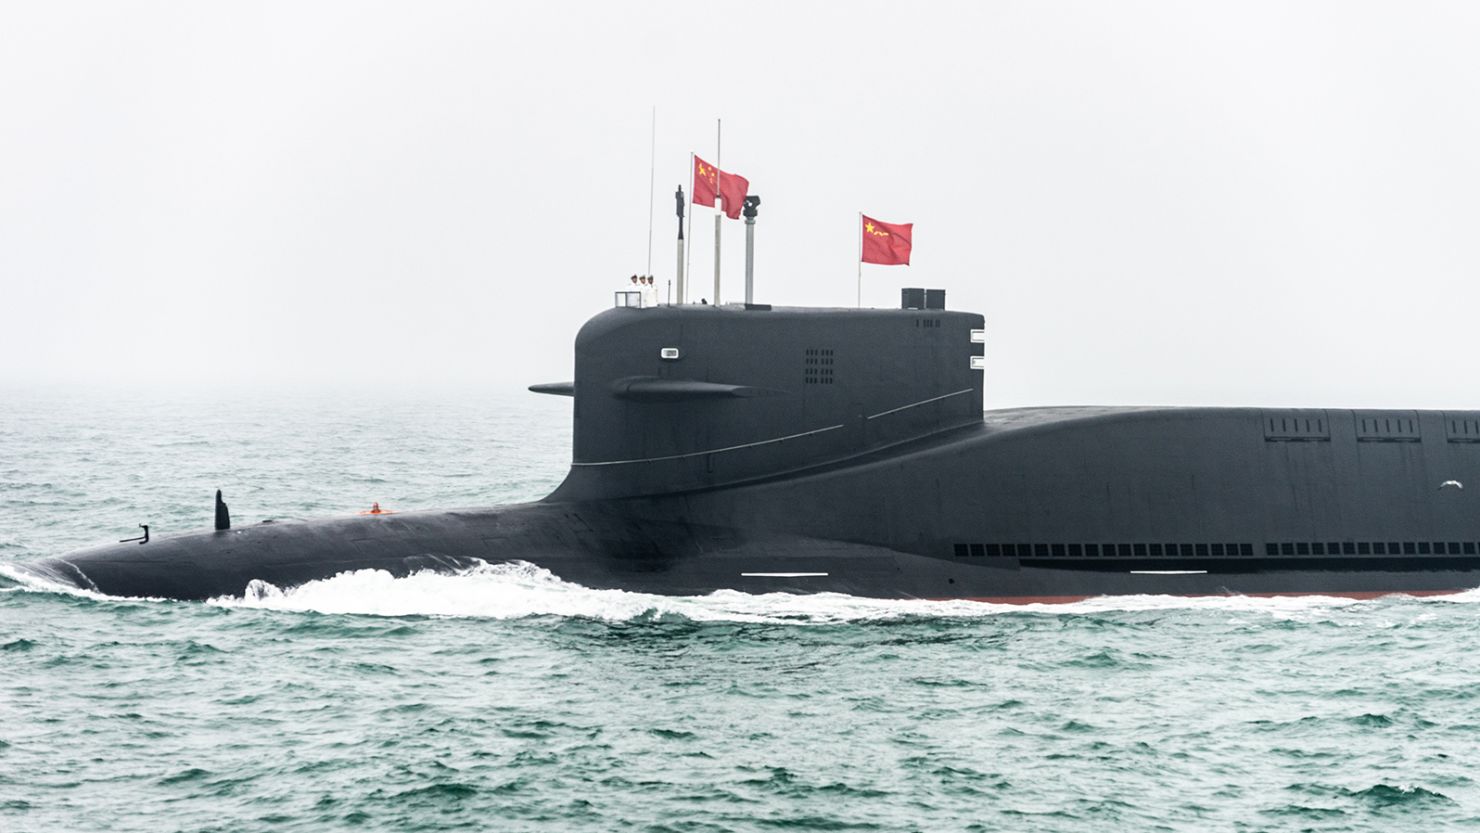 A Chinese ballistic missile submarine takes part in a military parade in the Yellow Sea in 2019.